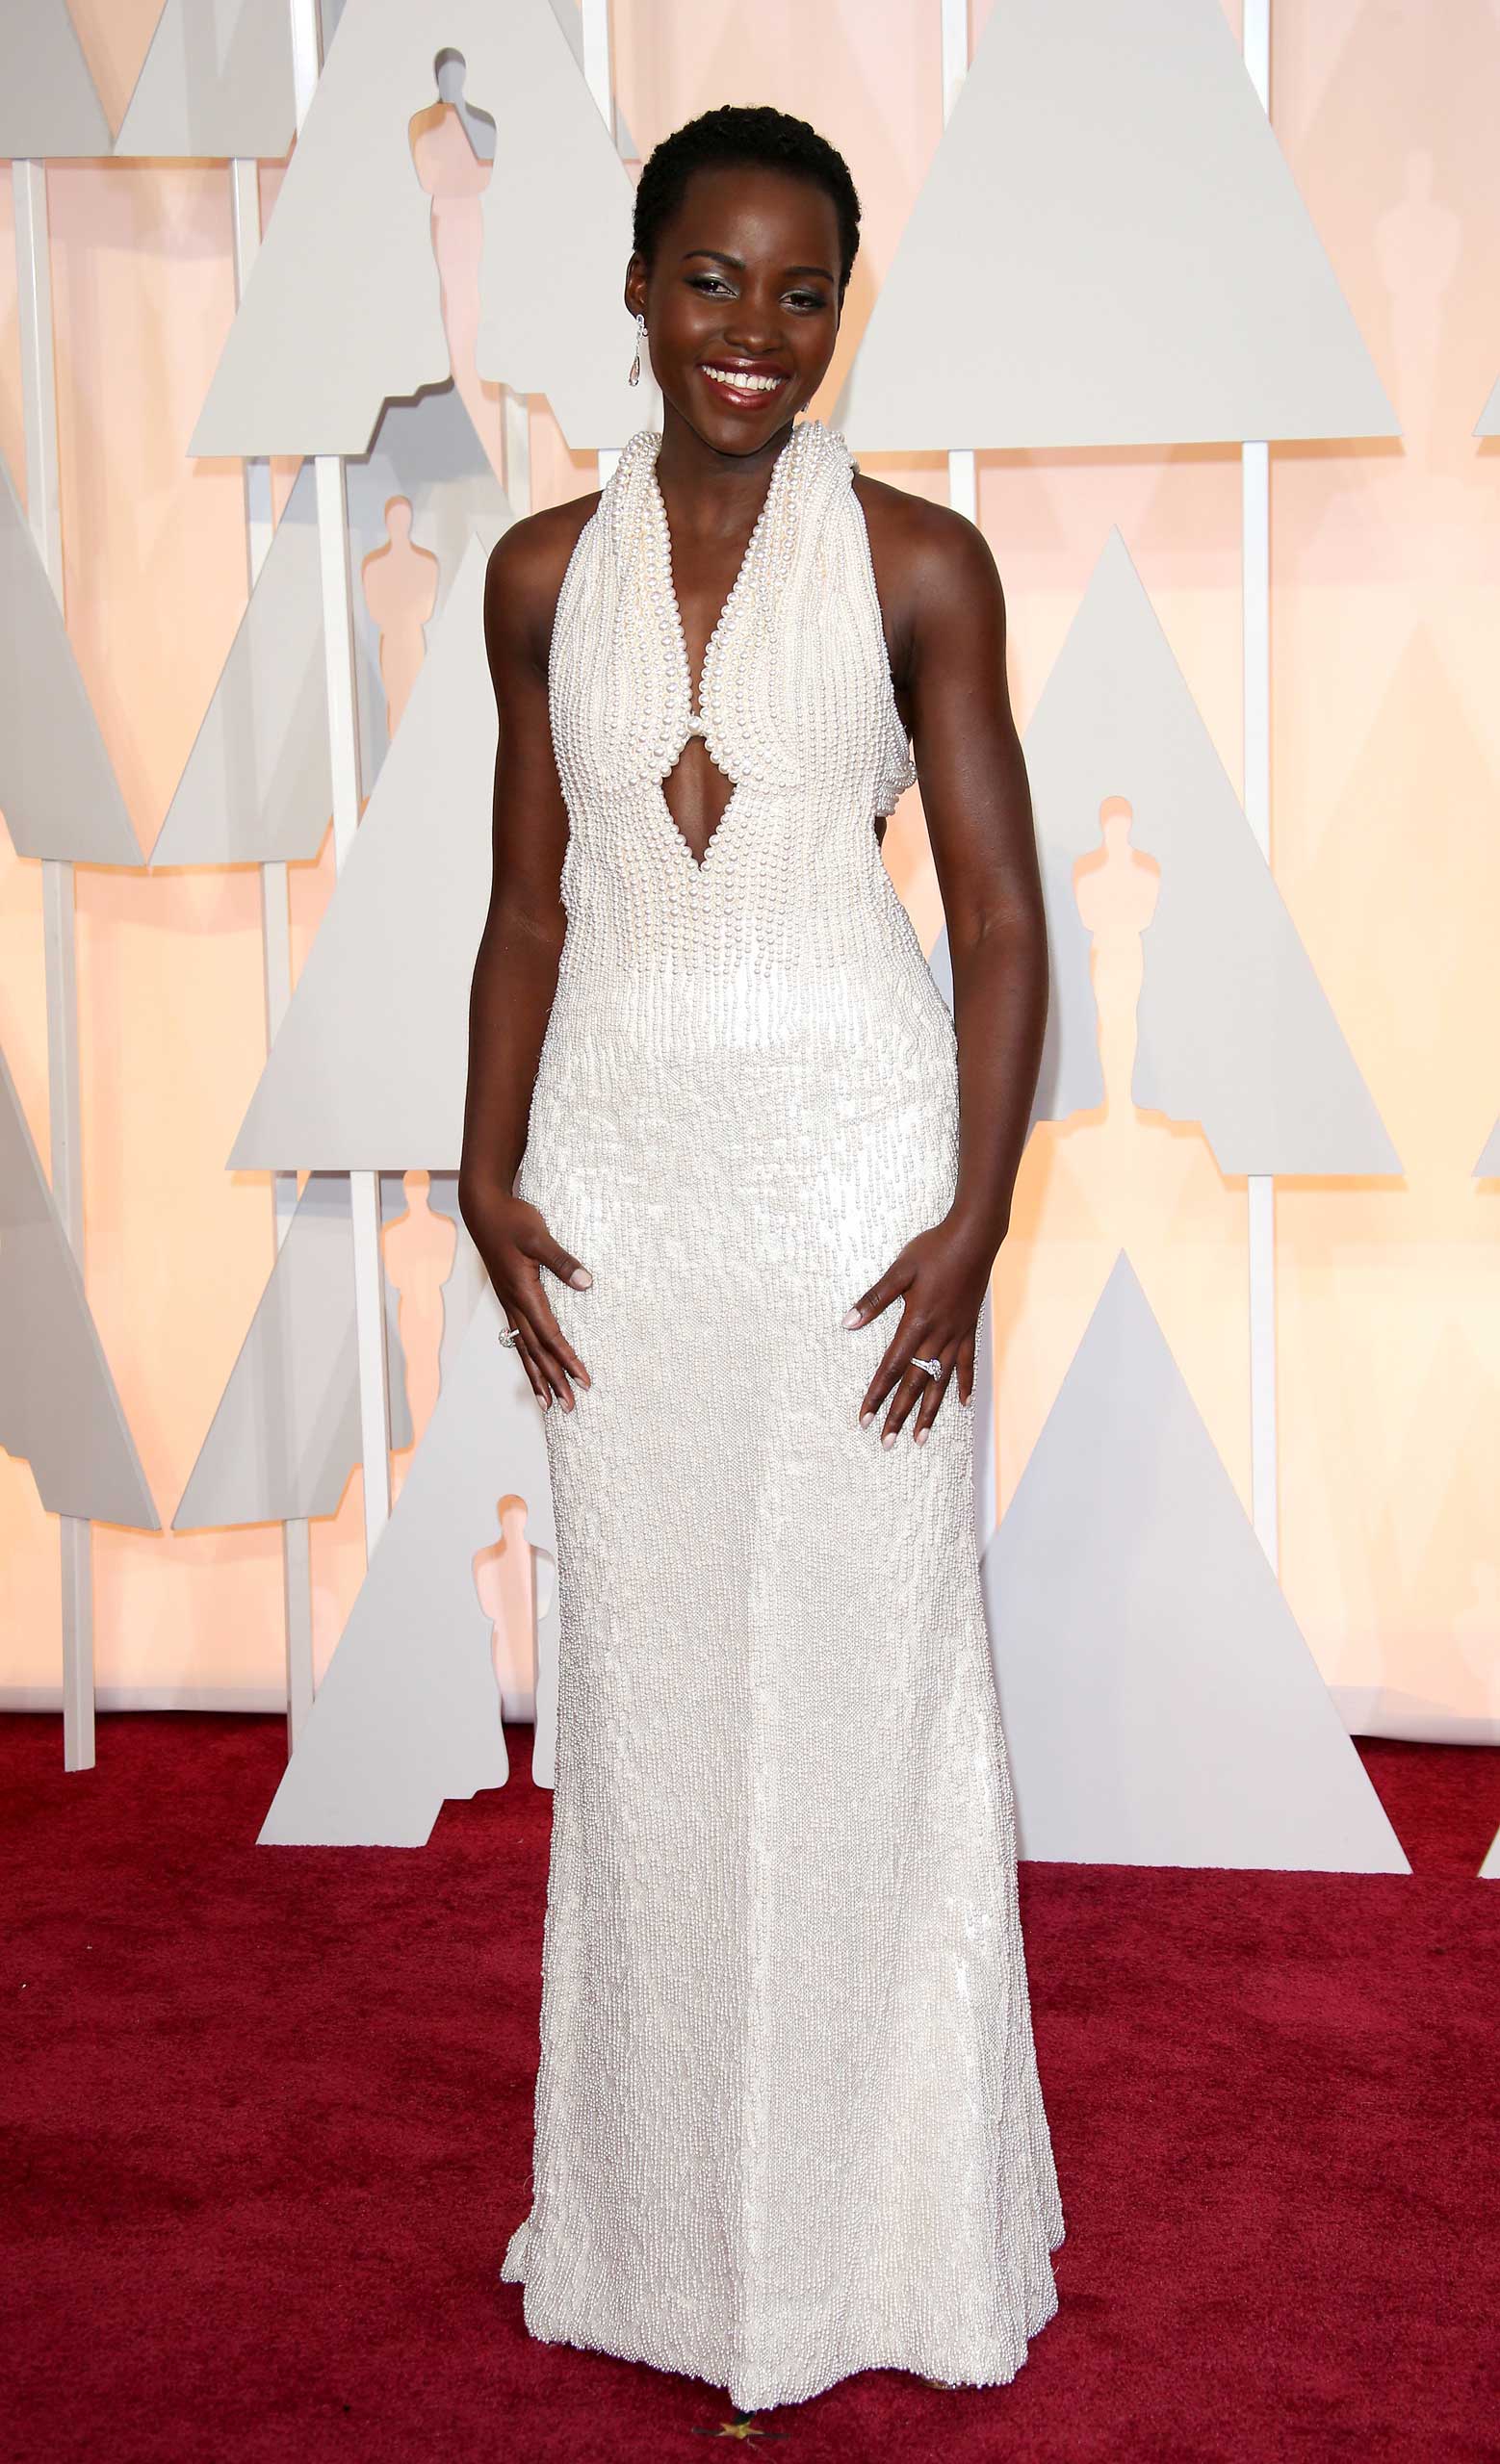 Lupita Nyong'o at the 87th Annual Academy Awards on Feb. 22, 2015 in Los Angeles (Dan MacMedan—WireImage/Getty Images)